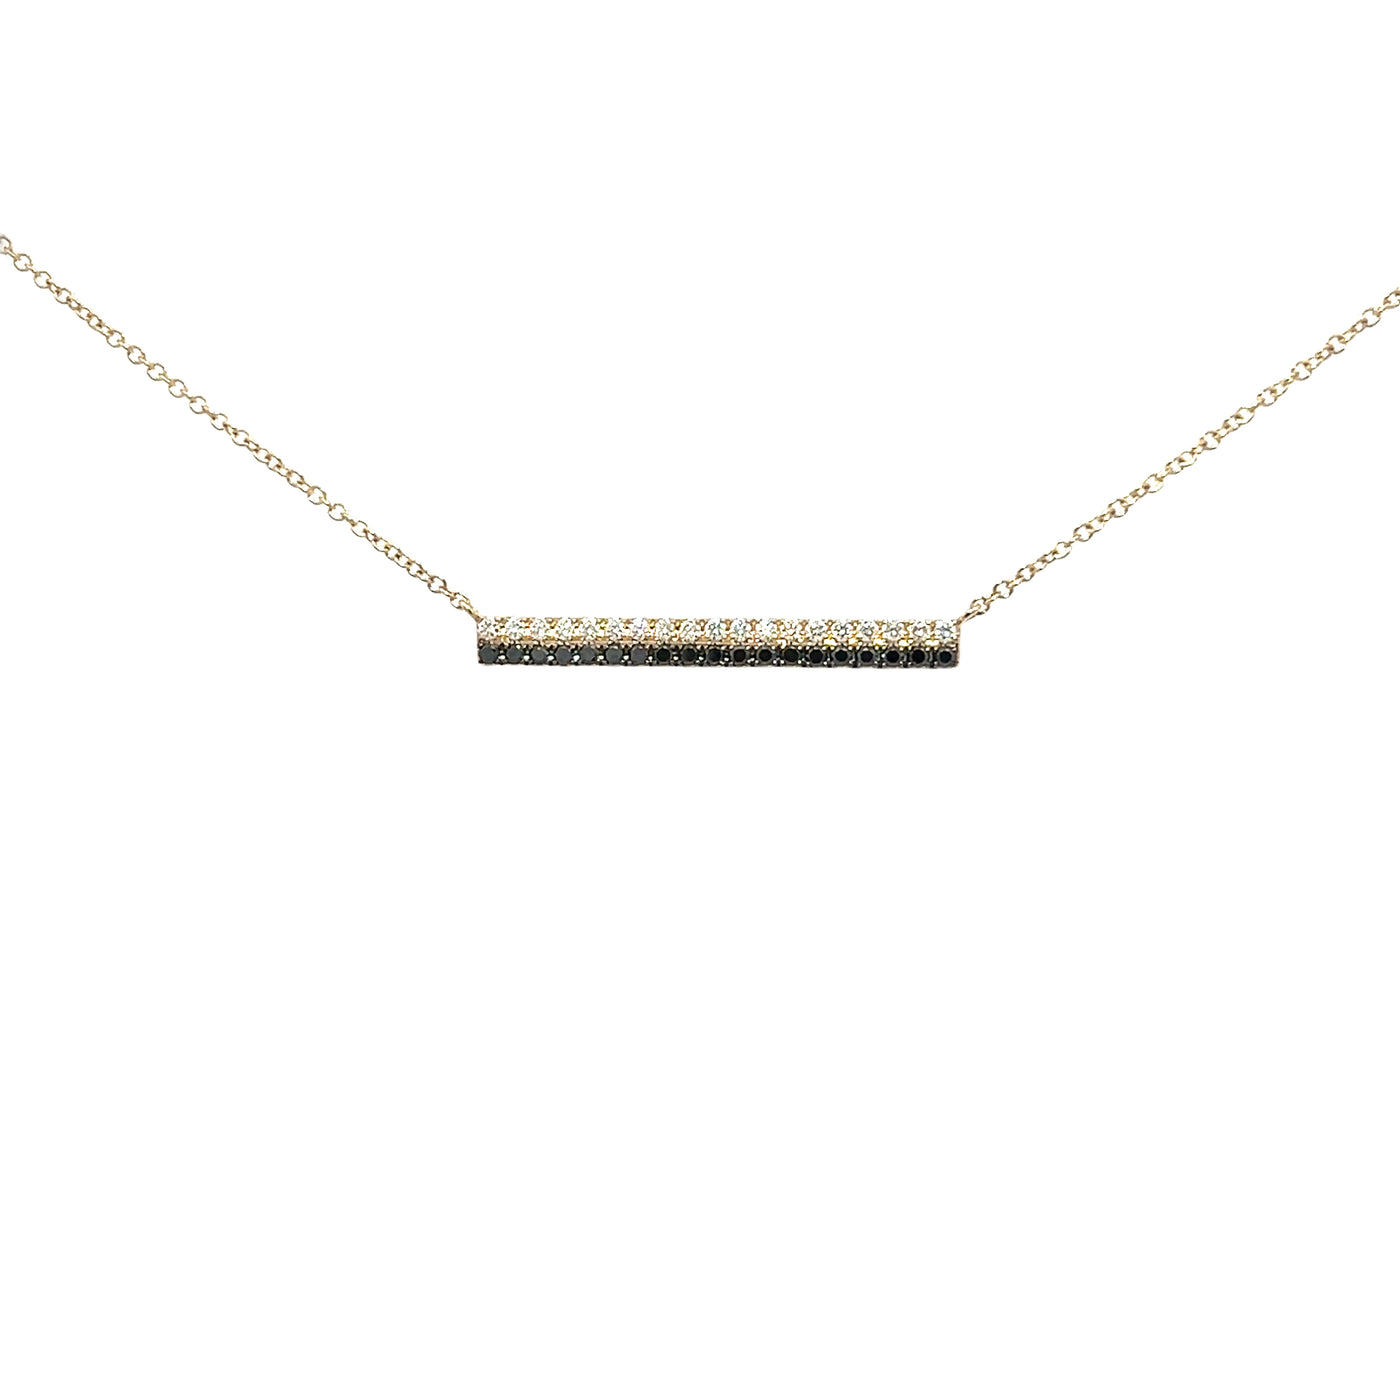 Perfect Gameday Diamond Necklace to Support your Favorite Team!